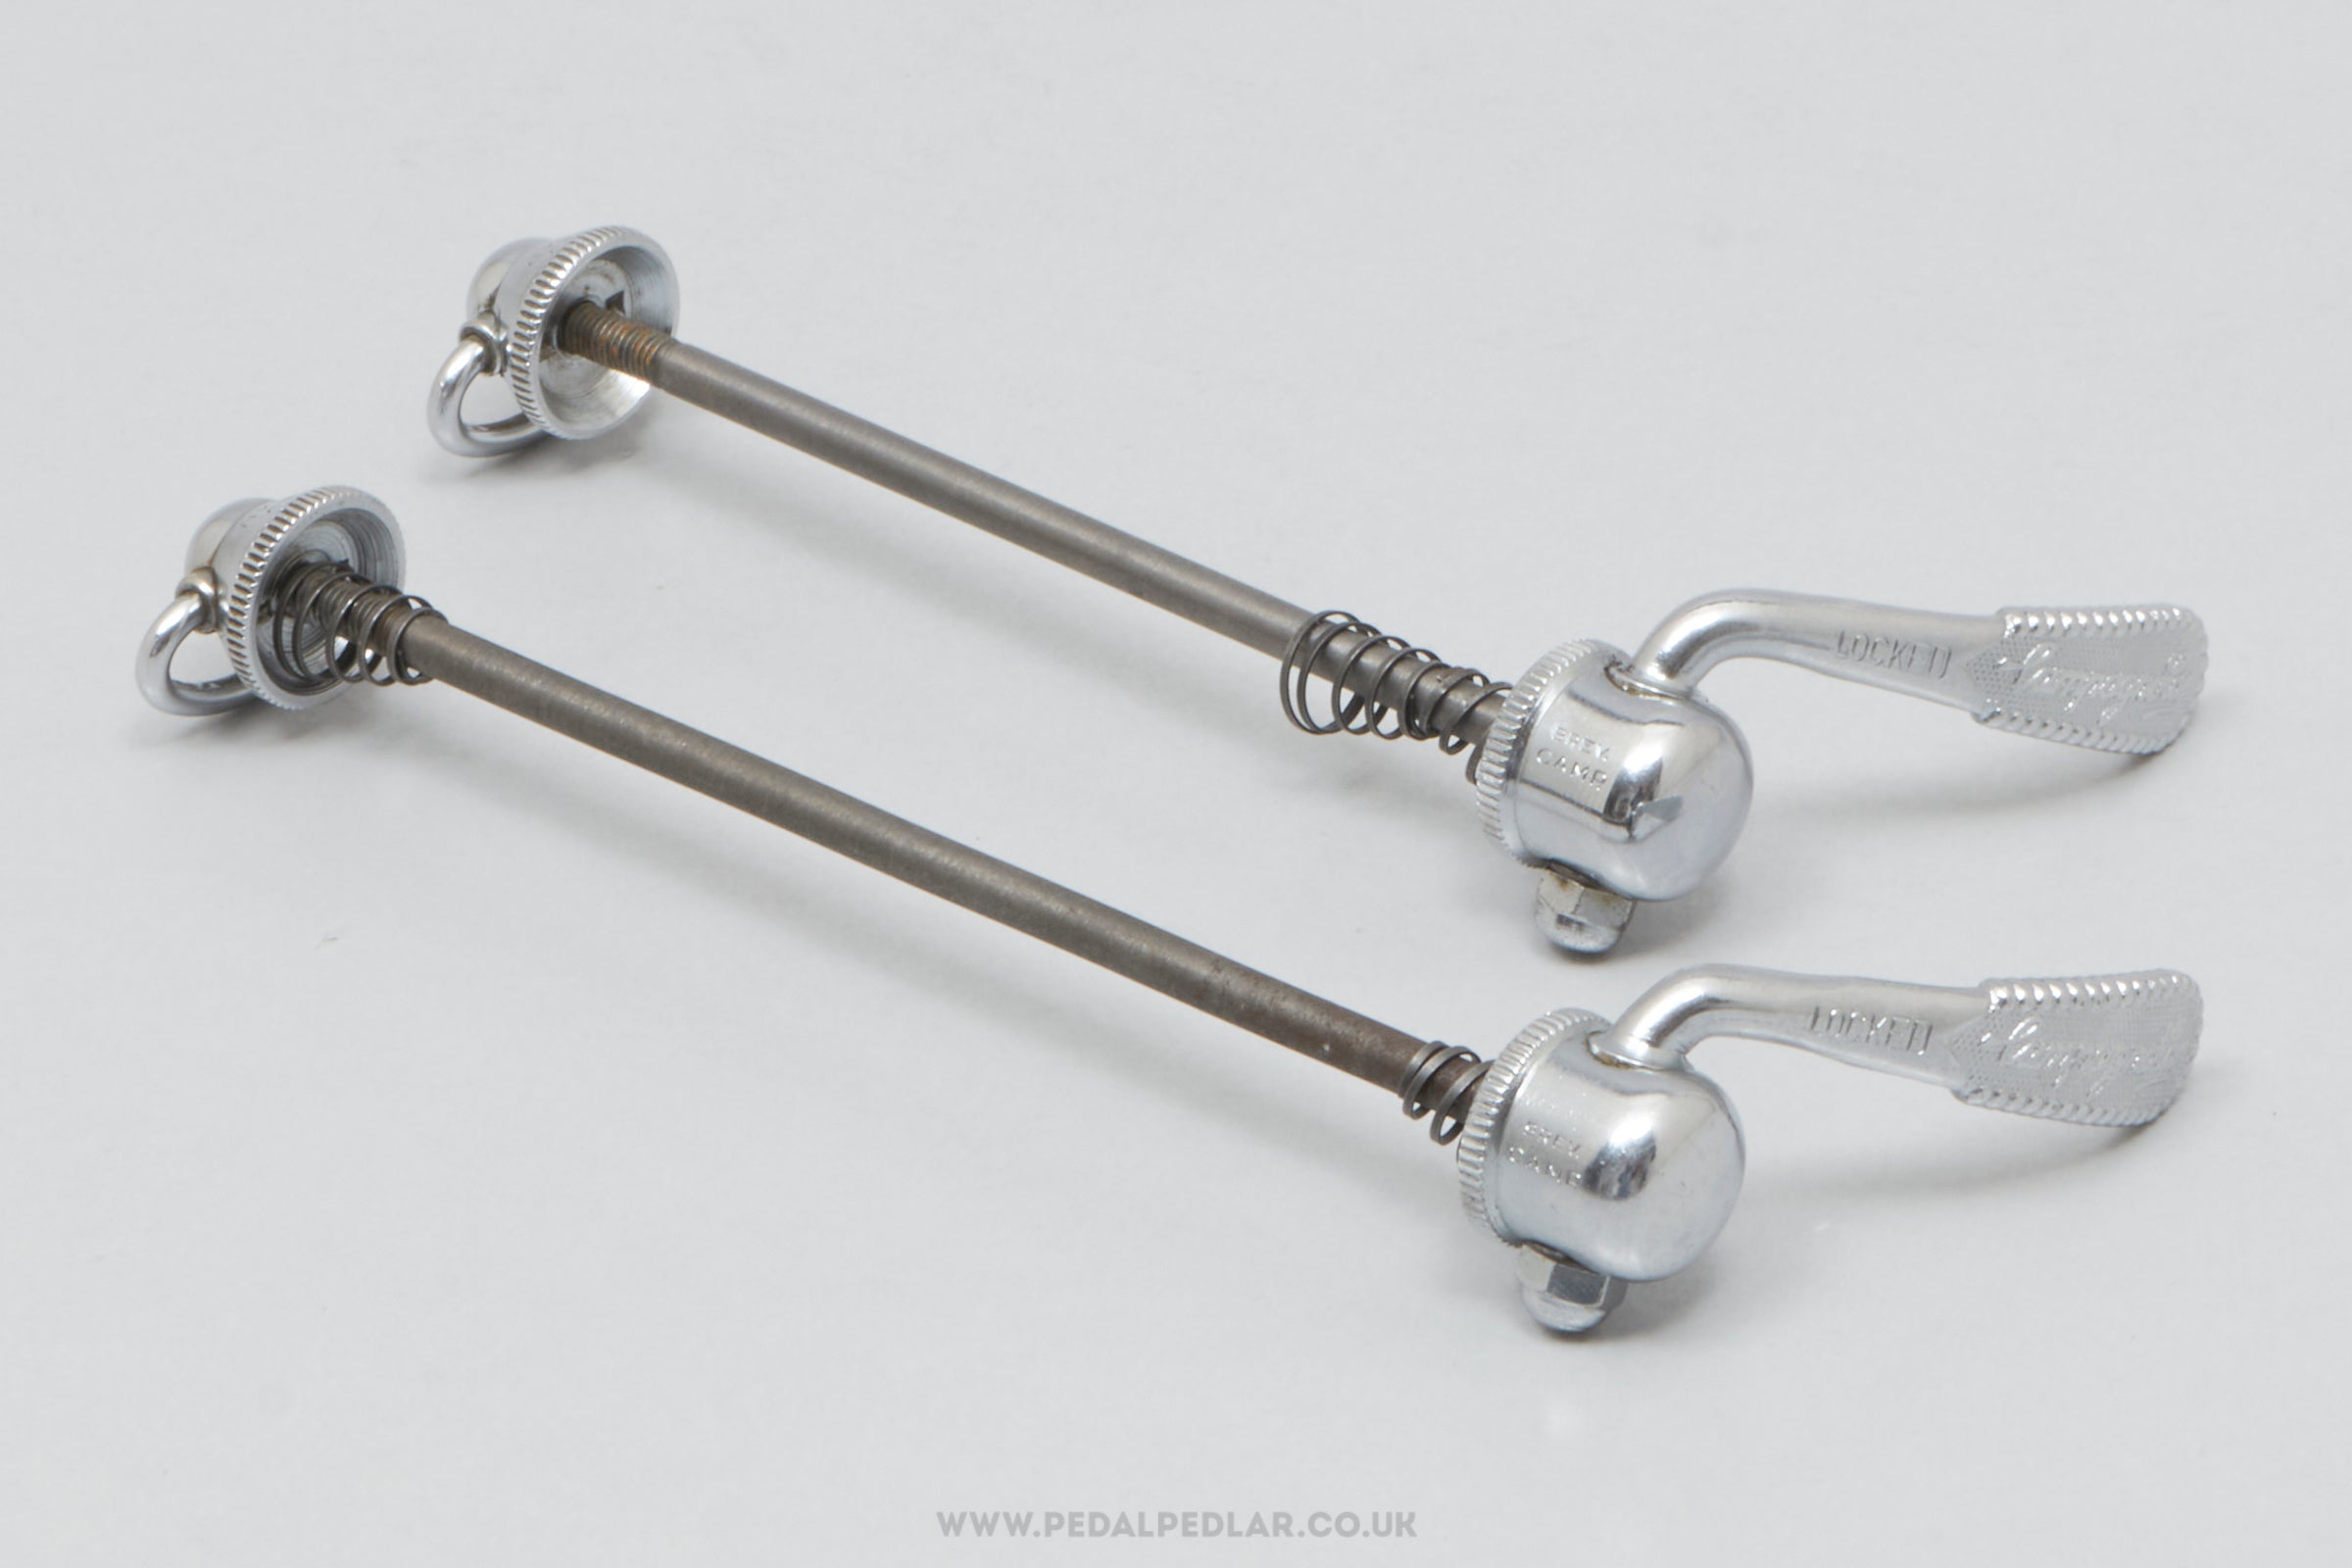 Campagnolo Nuovo/Super Record (1001/3 / 1006/8) Vintage Quick Release Skewers - Pedal Pedlar - Bike Parts For Sale